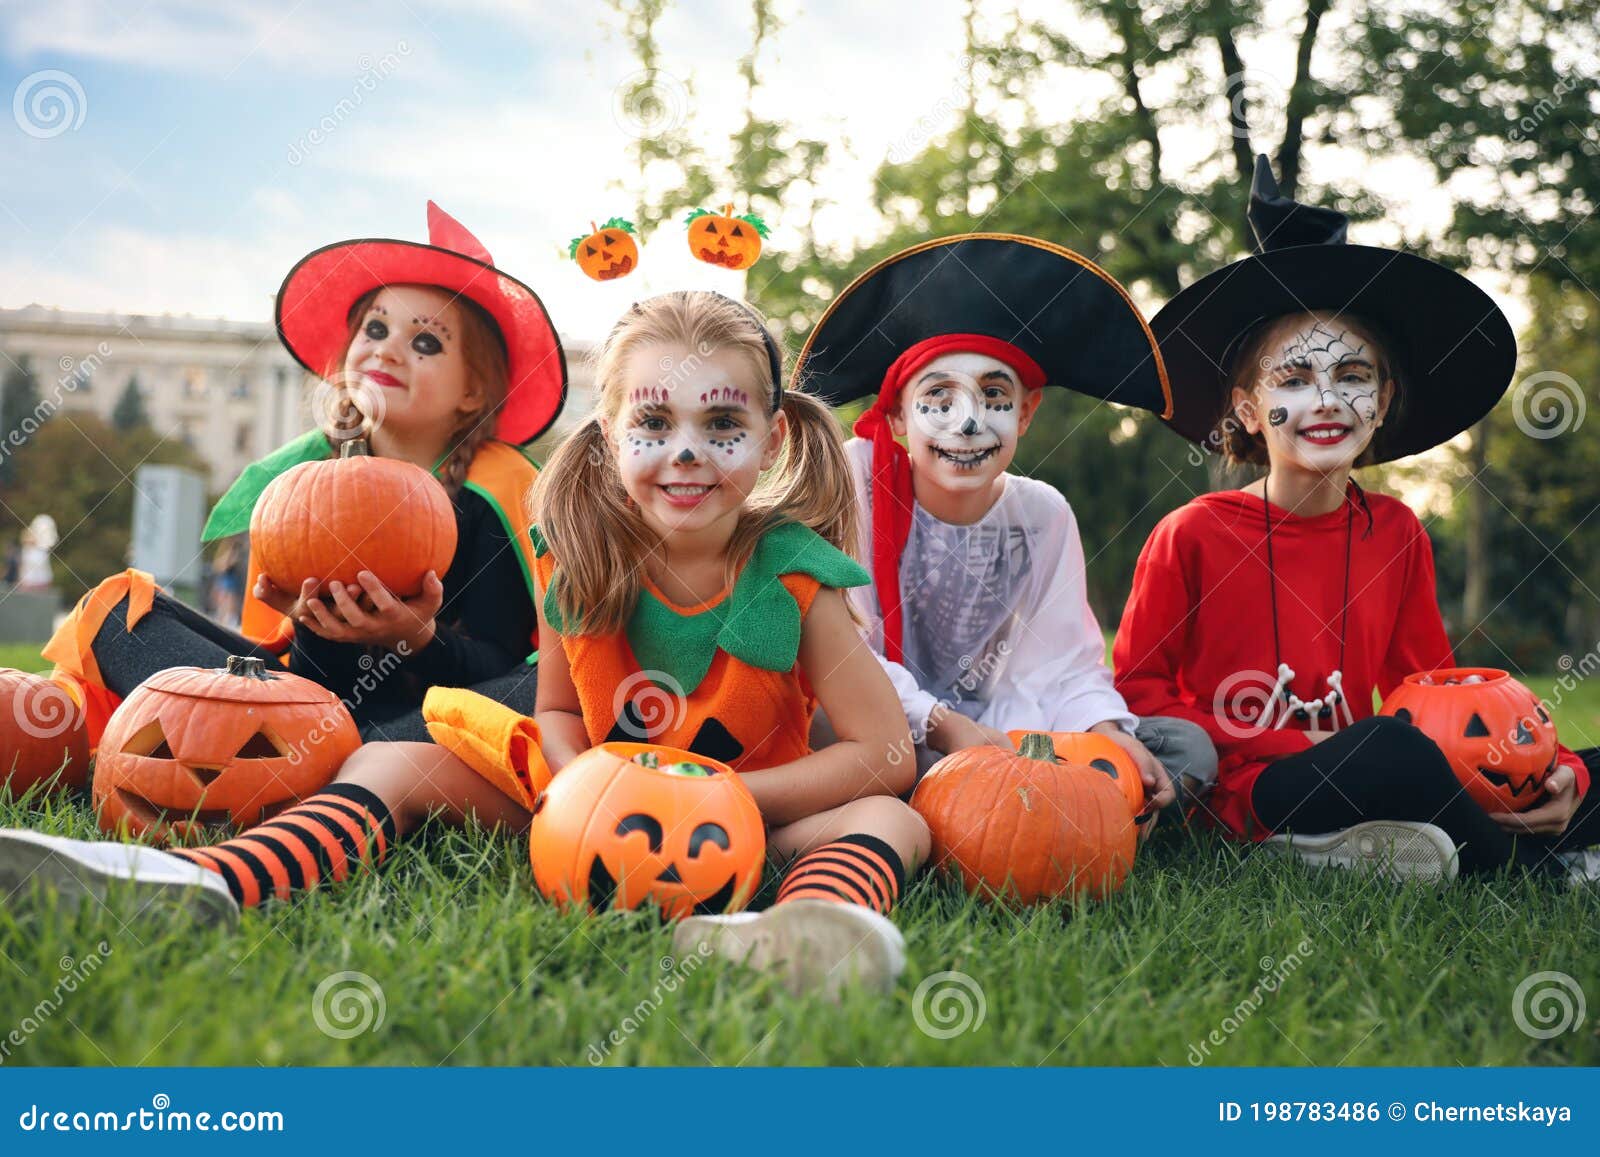 Cute Little Kids with Pumpkins Wearing Halloween Costumes in Park Stock ...